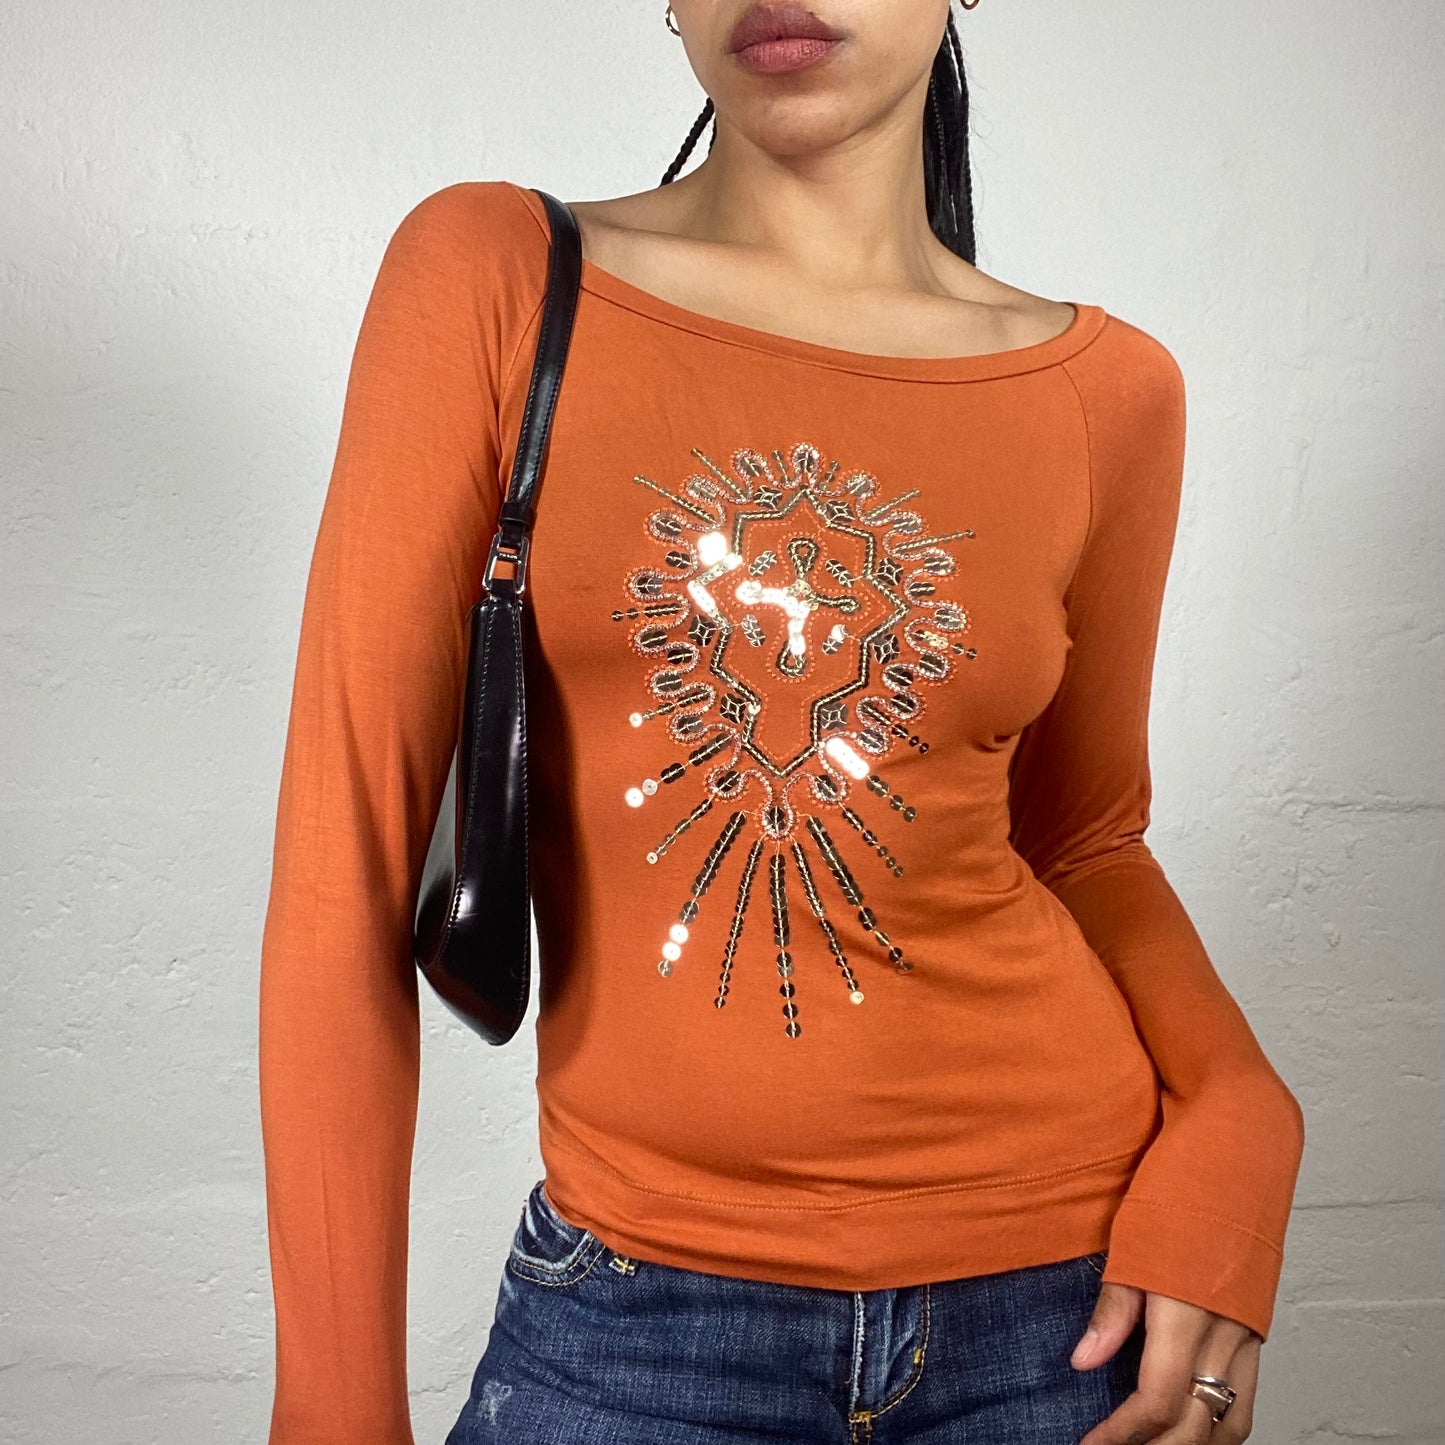 Vintage 2000's Glam Downtown Girl Orange Longsleeve Top with Sequin Embroidery (S)